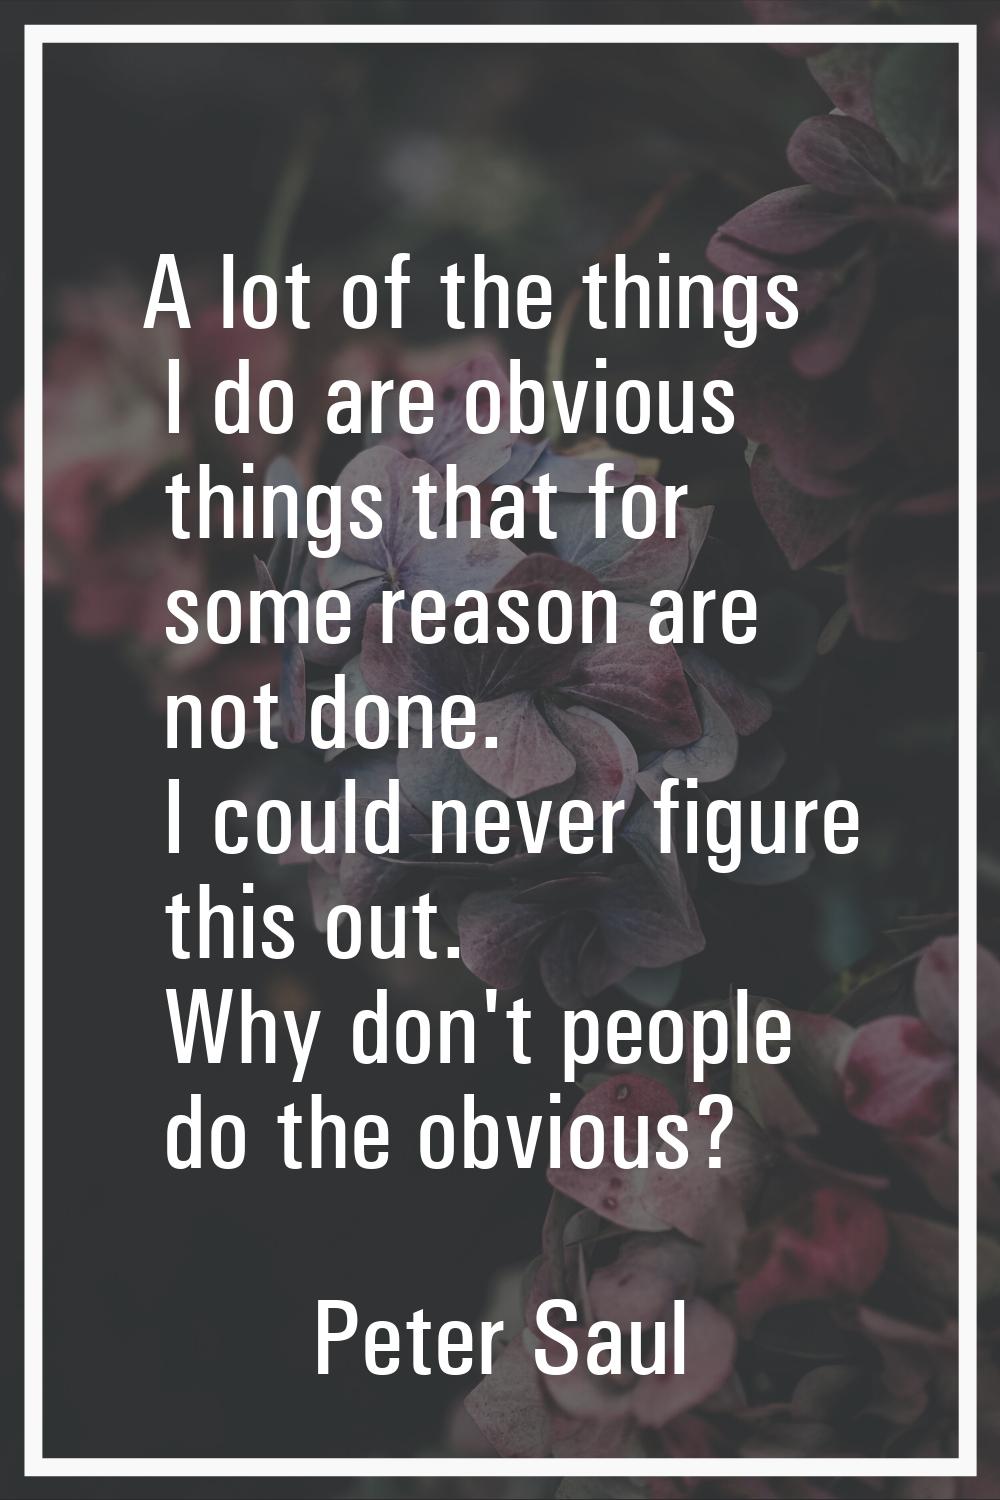 A lot of the things I do are obvious things that for some reason are not done. I could never figure